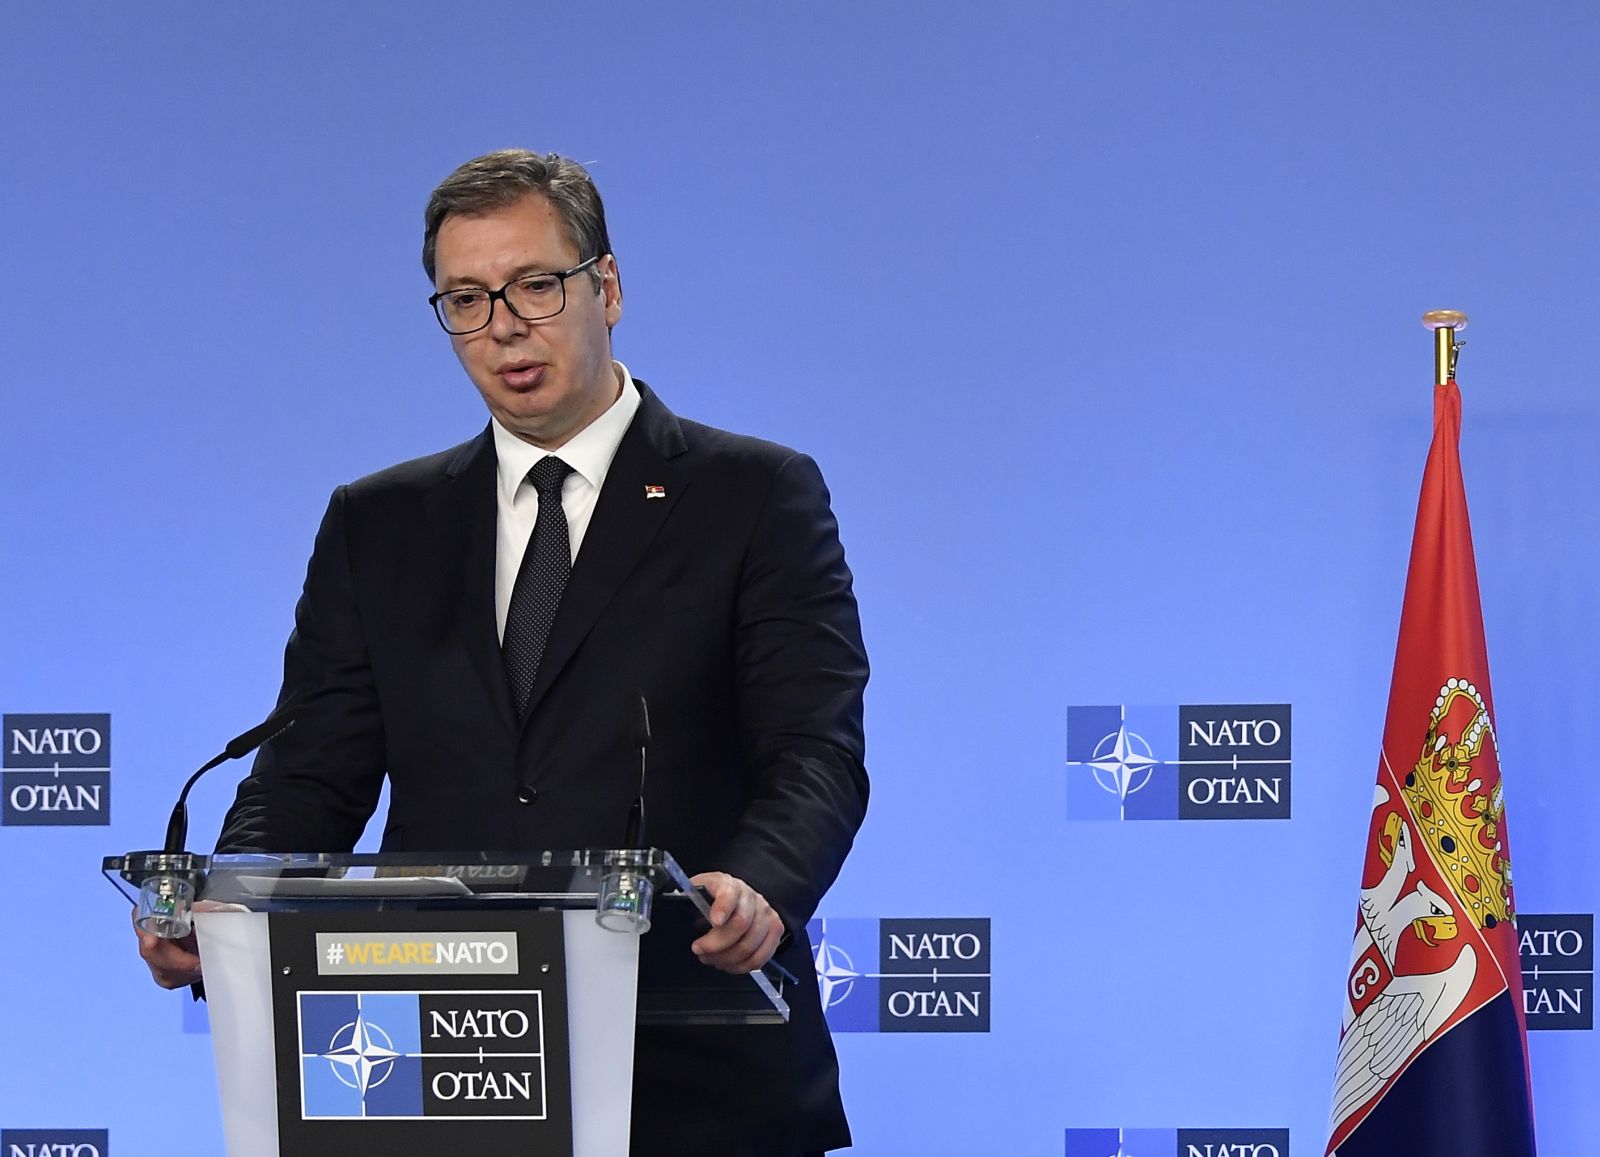 epa09207295 Serbian President Aleksandar Vucic (L) speaks during a joint press conference with NATO Secretary General Jens Stoltenberg (R), after their bilateral meeting at the Nato Alliance's headquarters in Brussels, Belgium, 17 May 2021  EPA/JOHN THYS / POOL